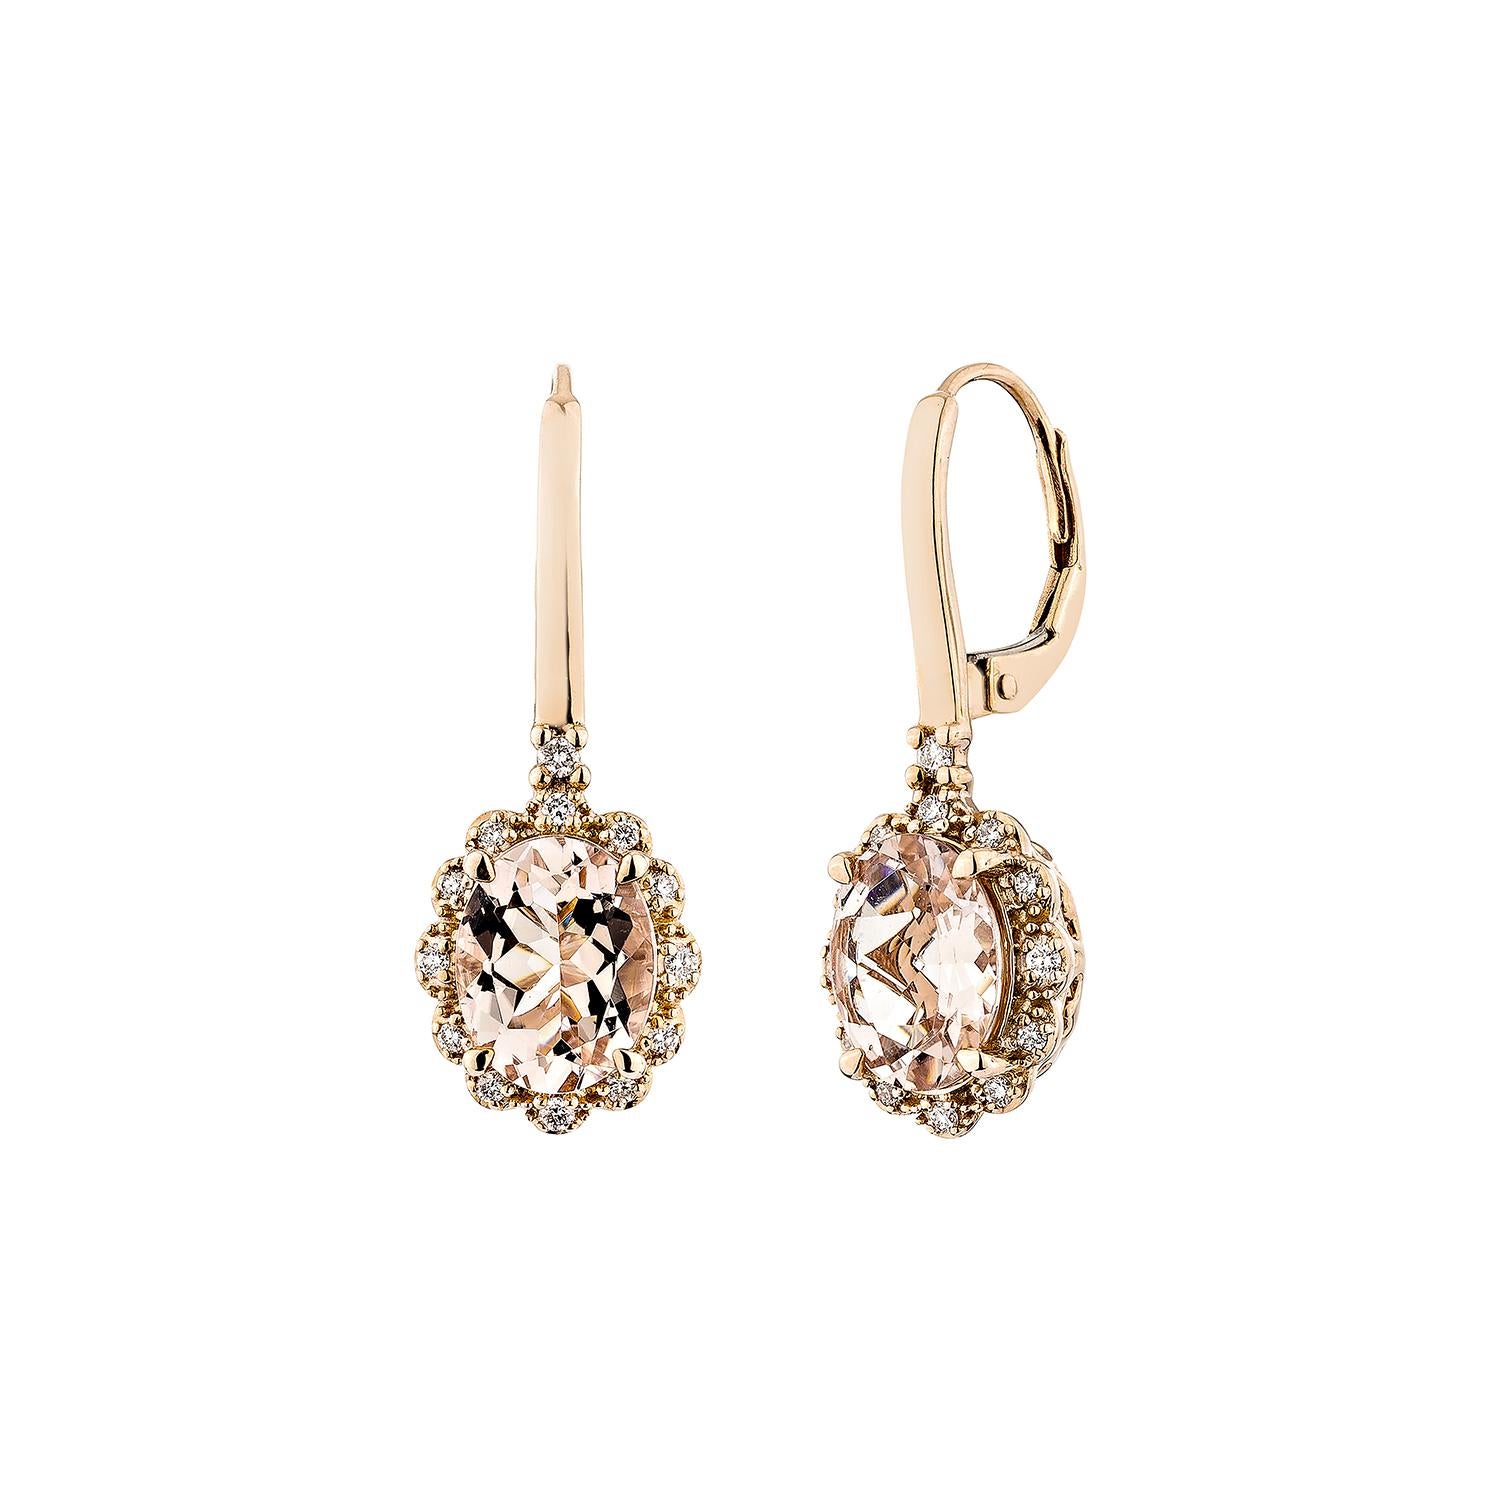 Oval Cut 2.92 Carat Morganite Drop Earring in 18Karat Rose Gold with White Diamond. For Sale